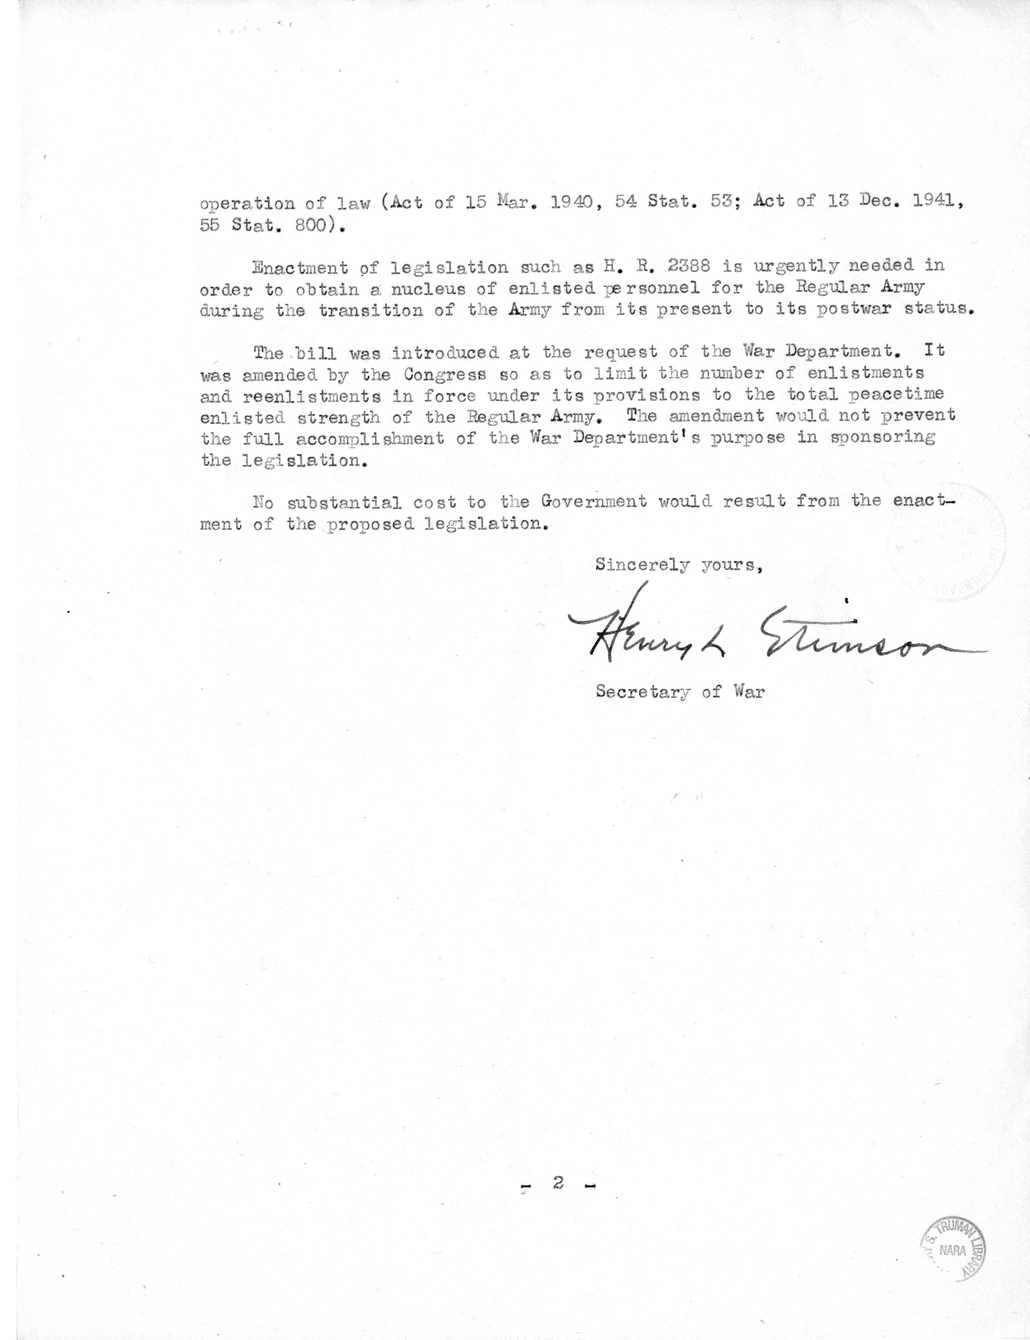 Memorandum from Harold D. Smith to M. C. Latta, H. R. 2388, to Provide for Regular Enlistments in the Army During the Period of the War, and Other Purposes, with Attachments